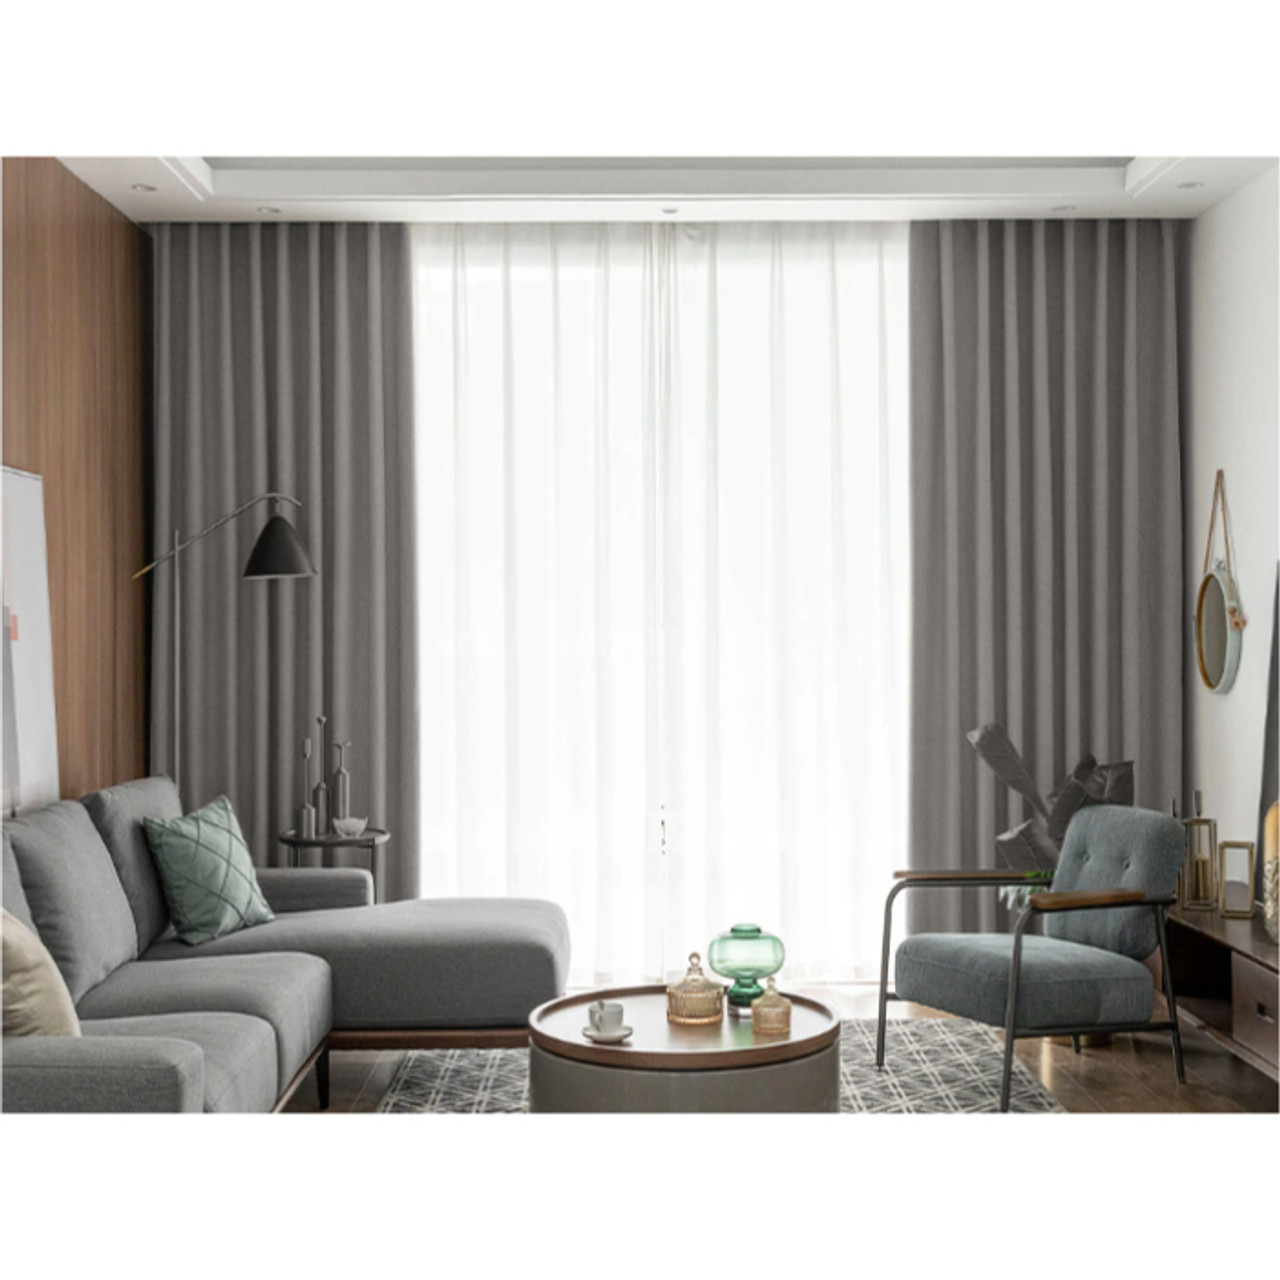 HIGH QUALITY BLOCKOUT BLACKOUT EYELET CURTAINS DARKNESS 